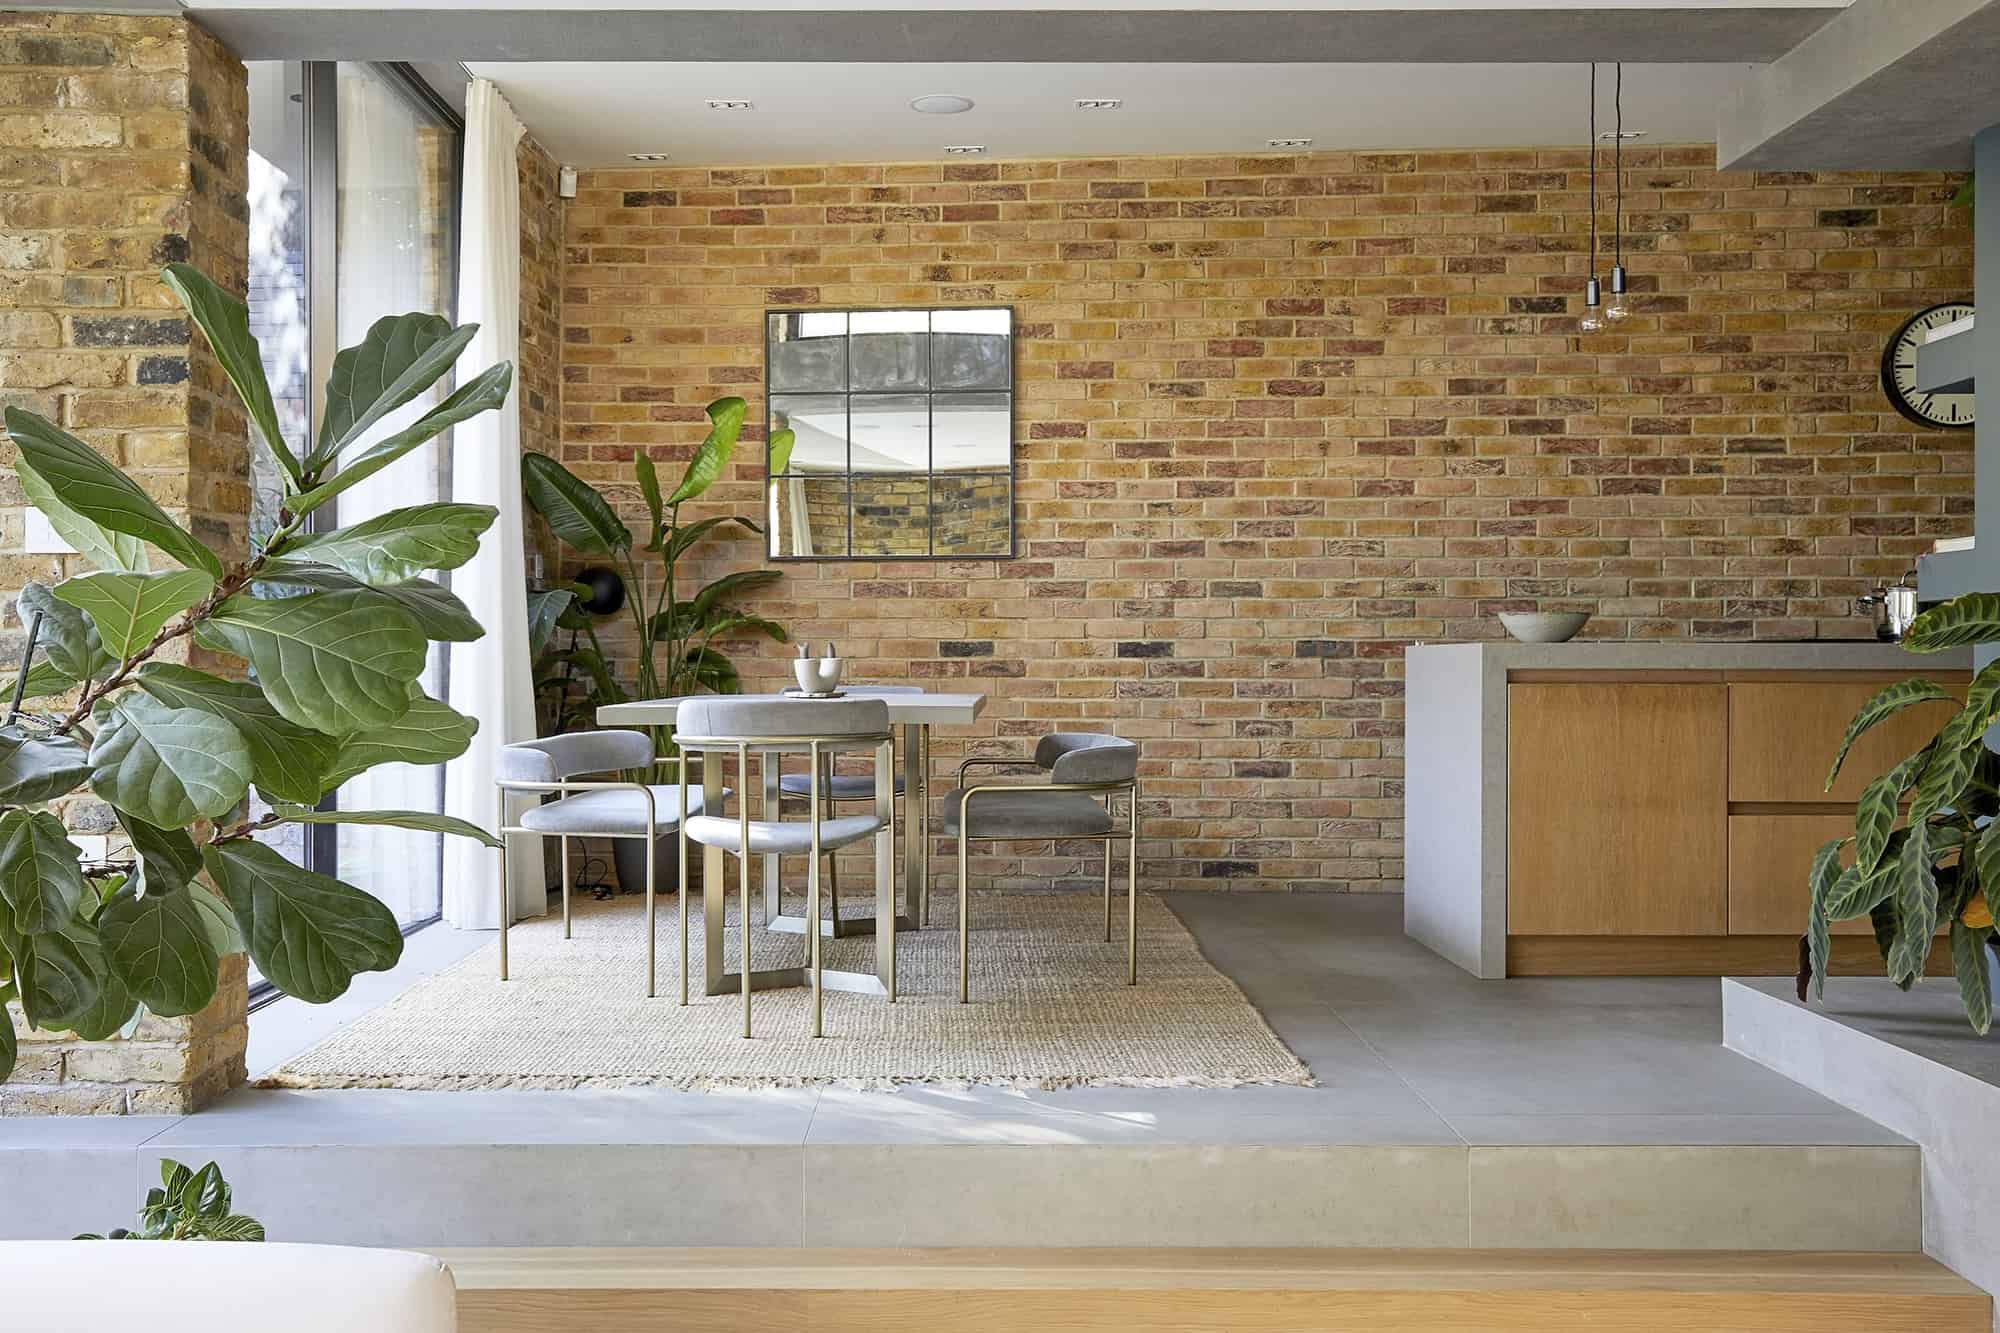 New Cross SE14 - A contemporary home with exposed brick walls, concrete elements and large expanses of glass opening to substantial garden - The Location Guys